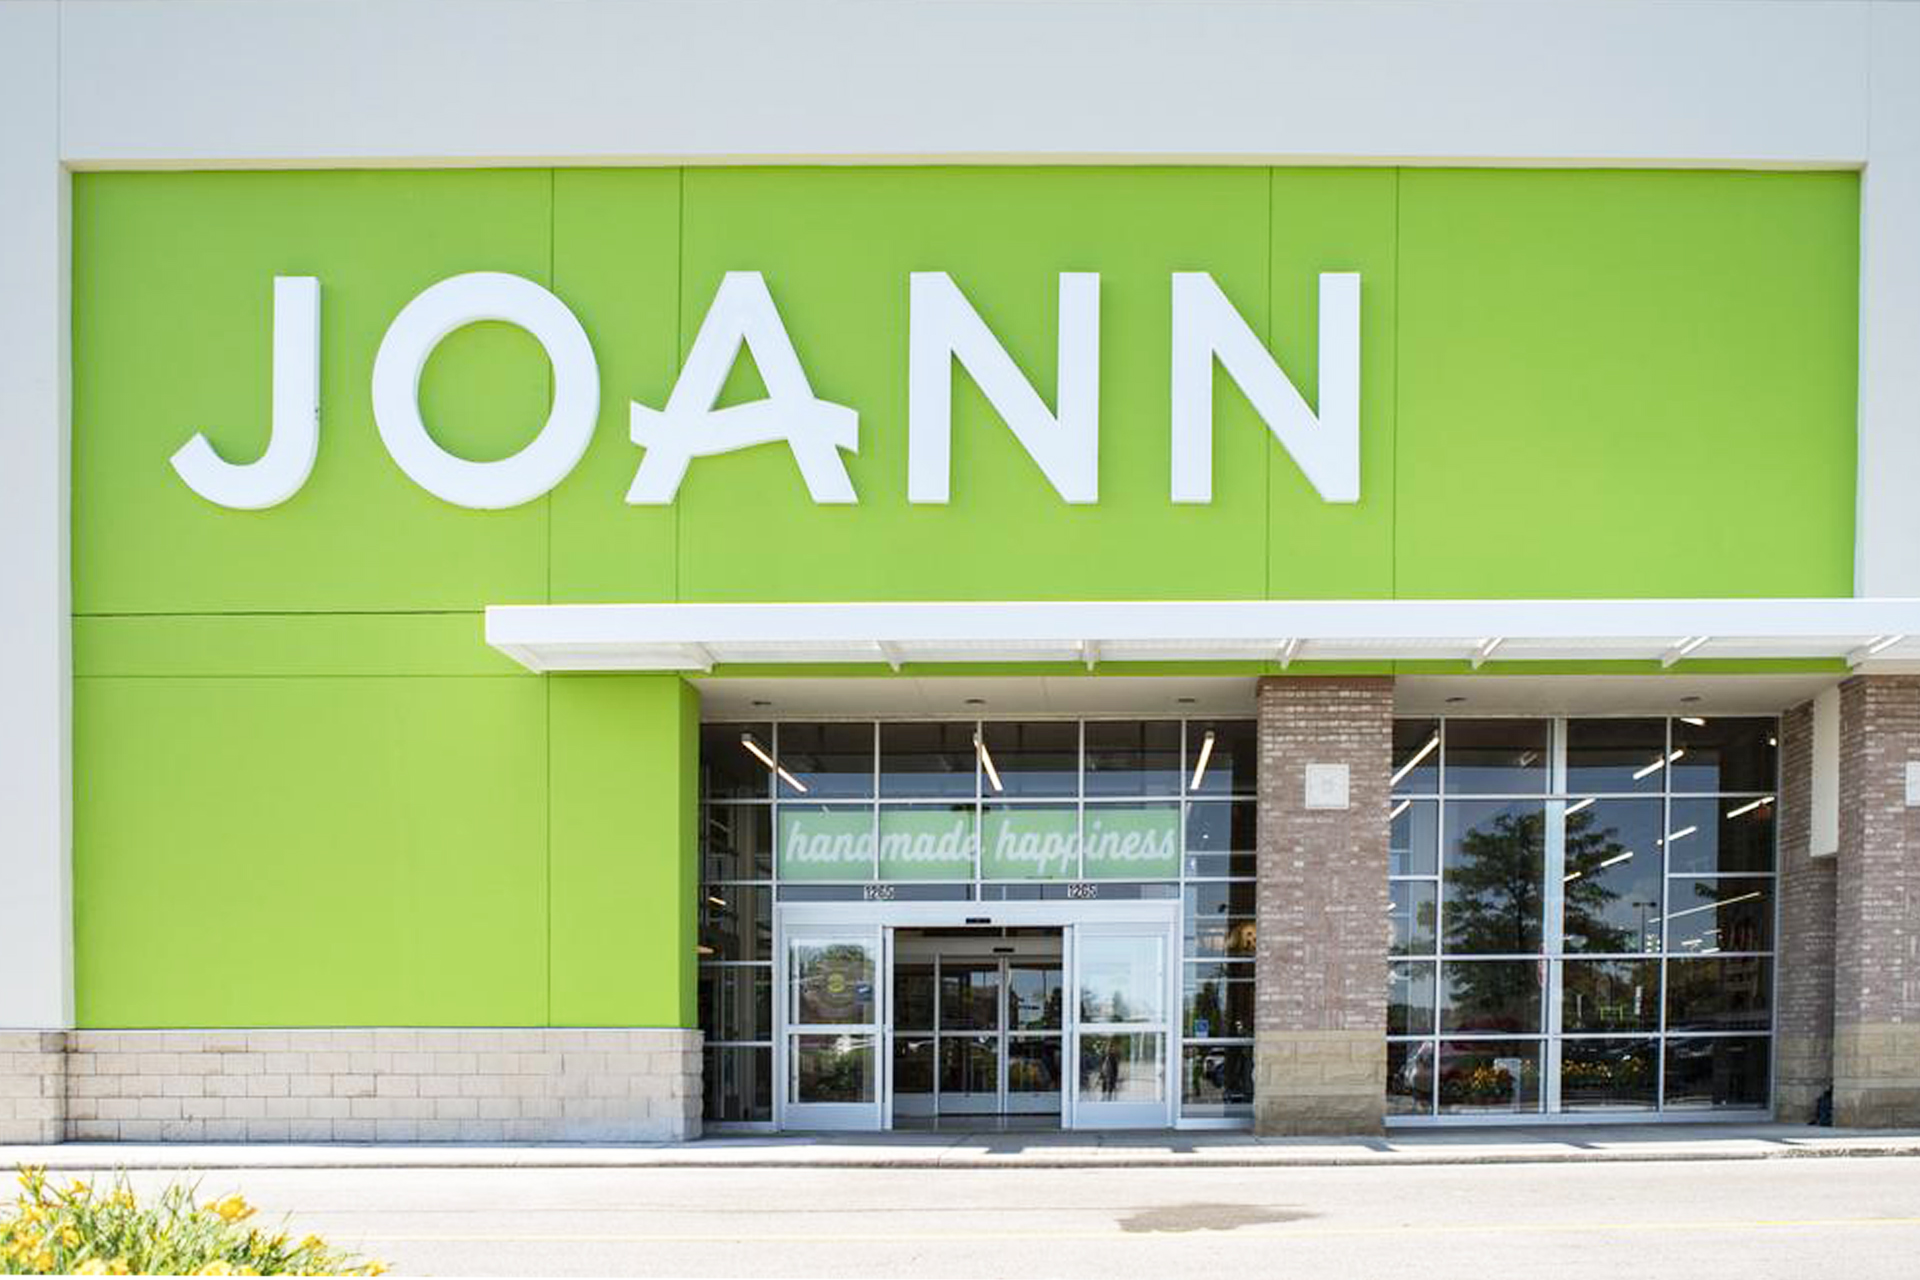 Joann Files for Chapter 11 Bankruptcy Protection, Will Go Private